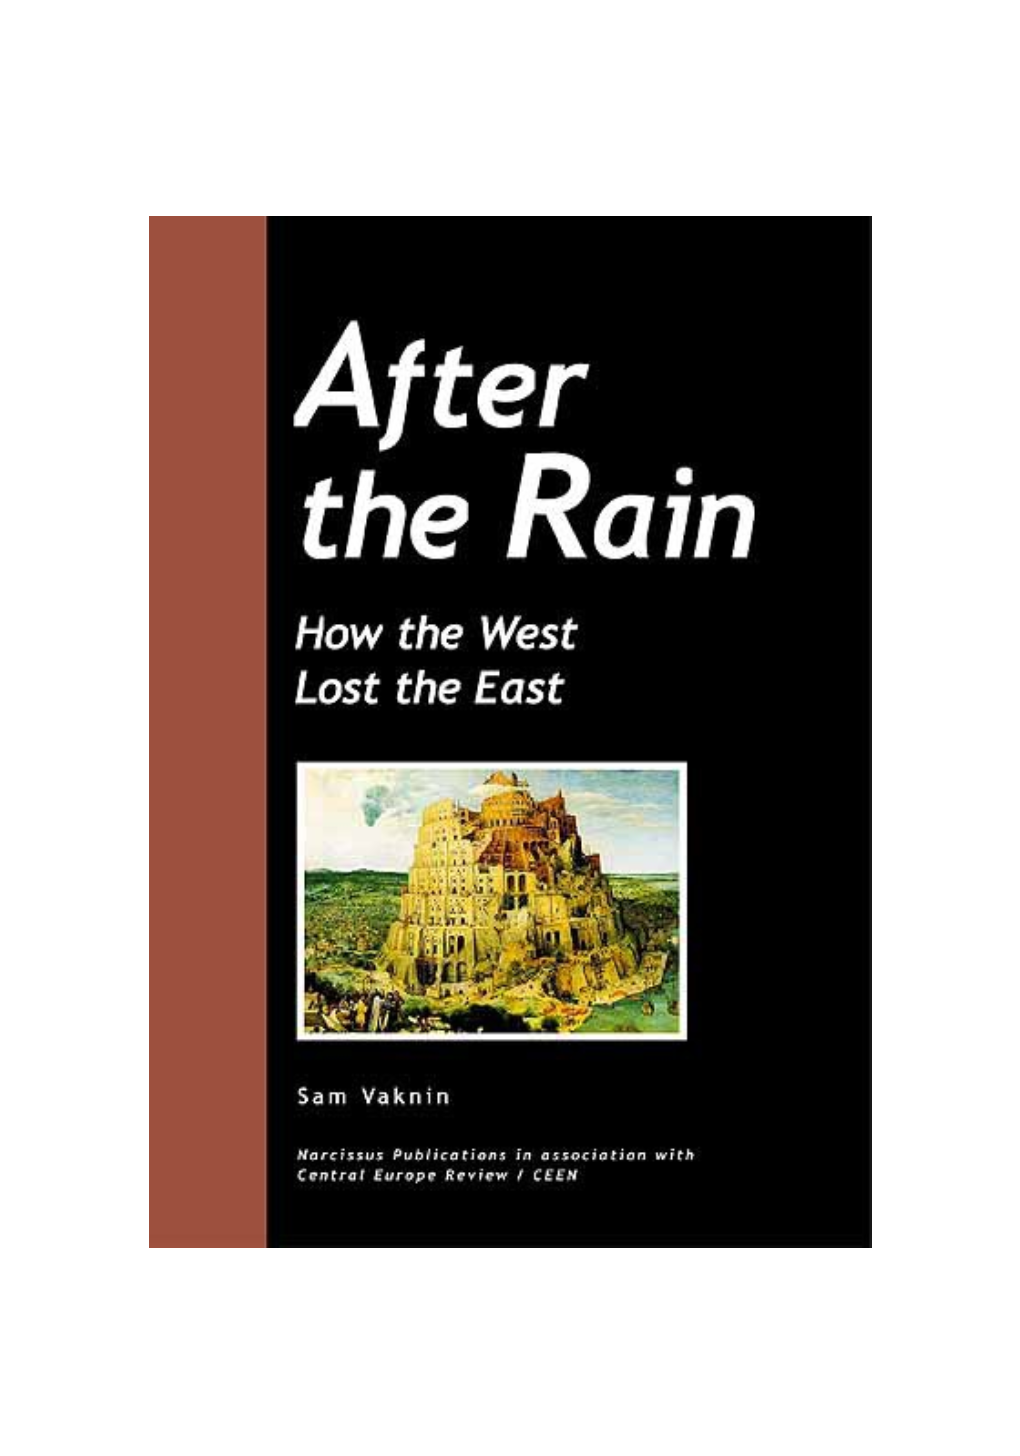 After the Rain - How the West Lost the East